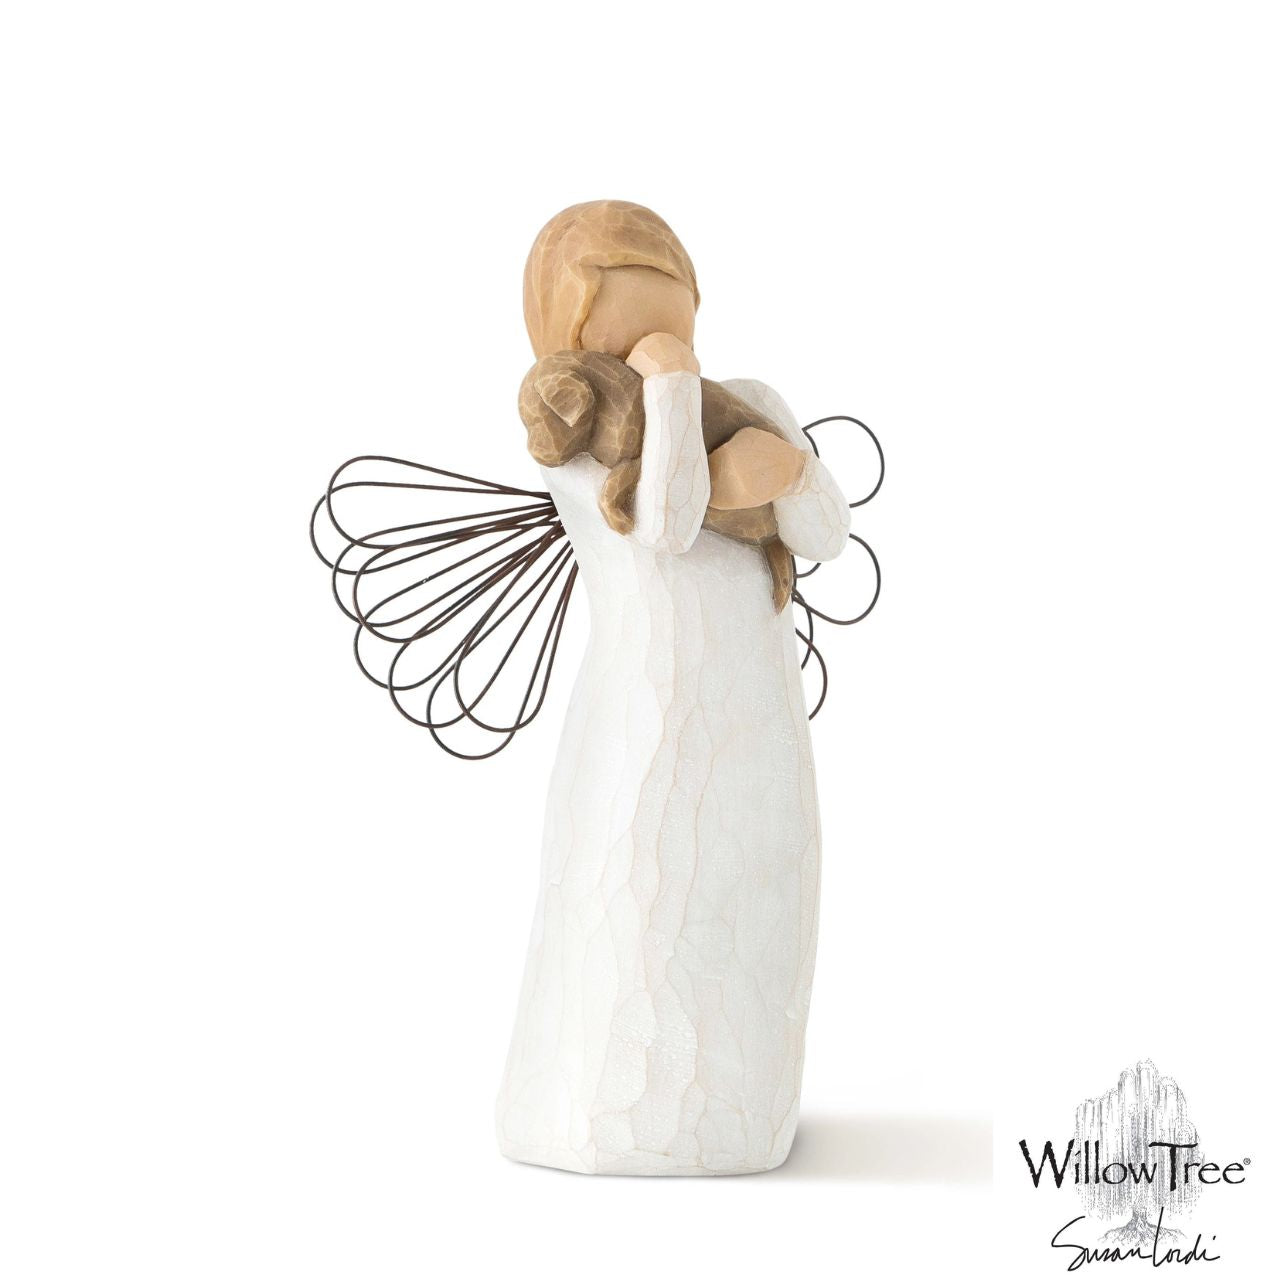 Angel of Friendship by Willow Tree  Willow Tree is an intimate line of figurative sculptures representing sentiments of love, closeness, healing, courage, hope...all the emotions we encounter in life. Artist Susan Lordi hand carves the original of each Willow Tree sculpture.